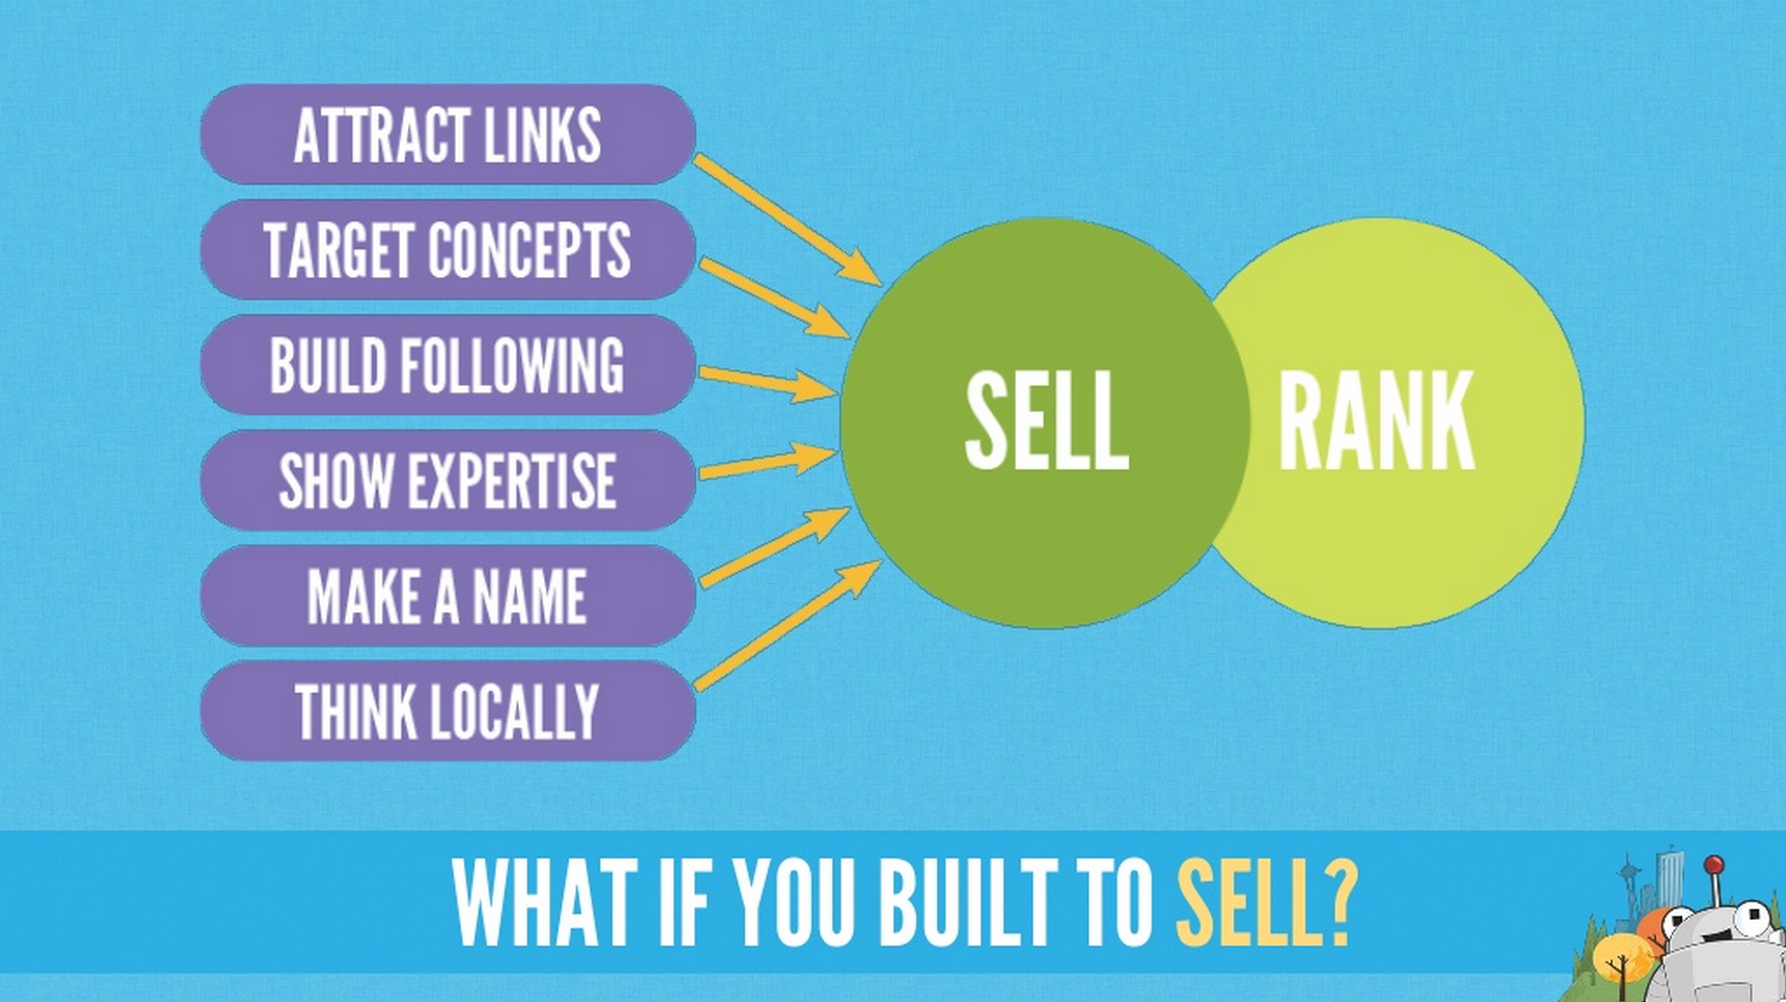 What if you built to sell?